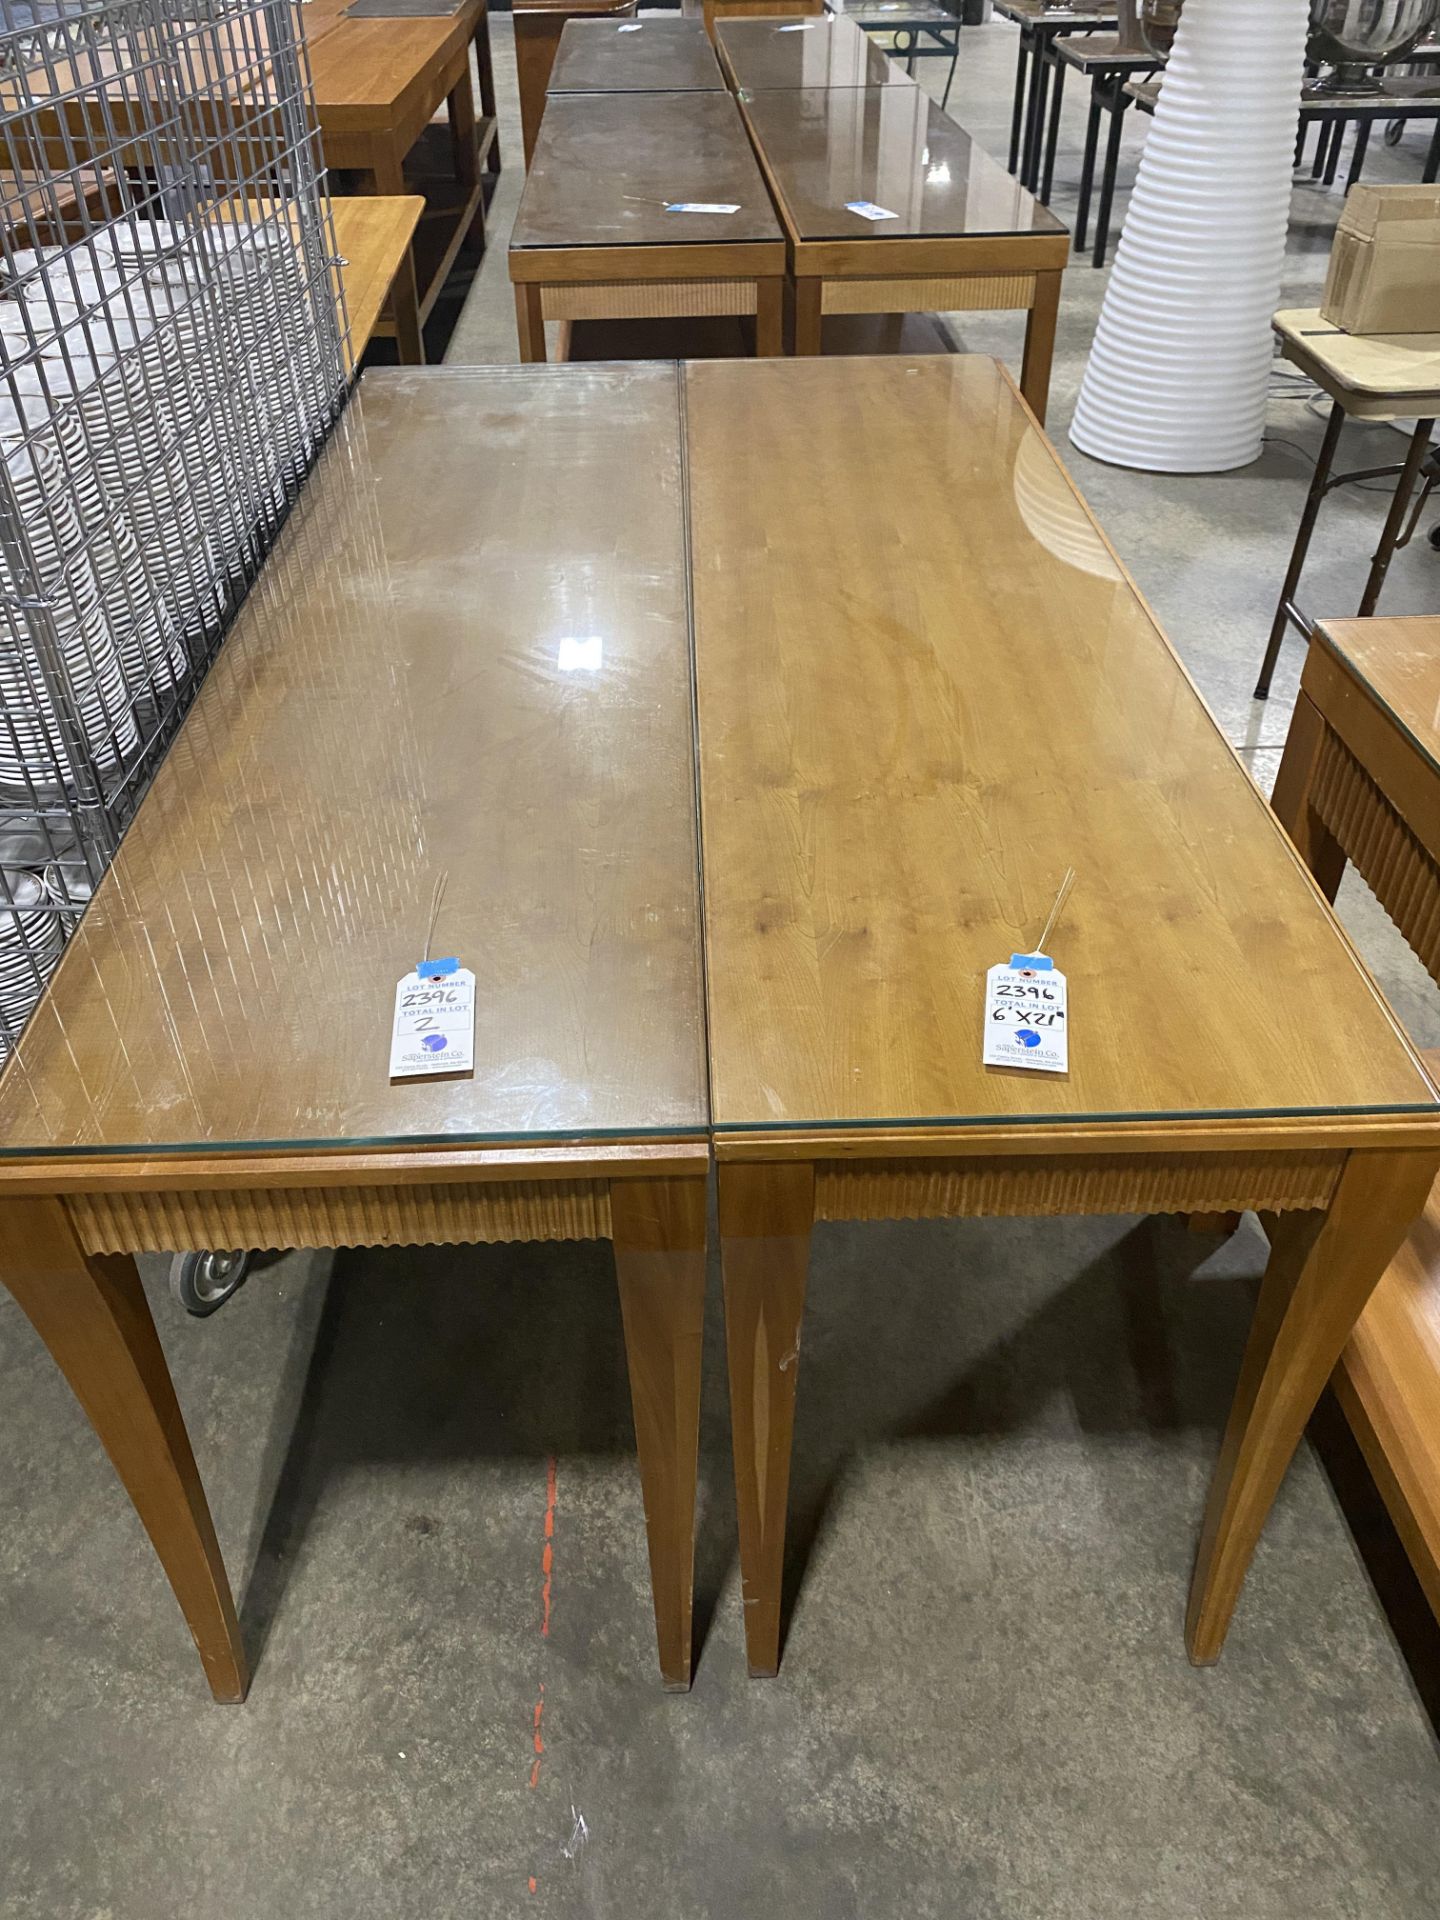 (2) 6' x 21" All Wood Soft Table w/Glass Top